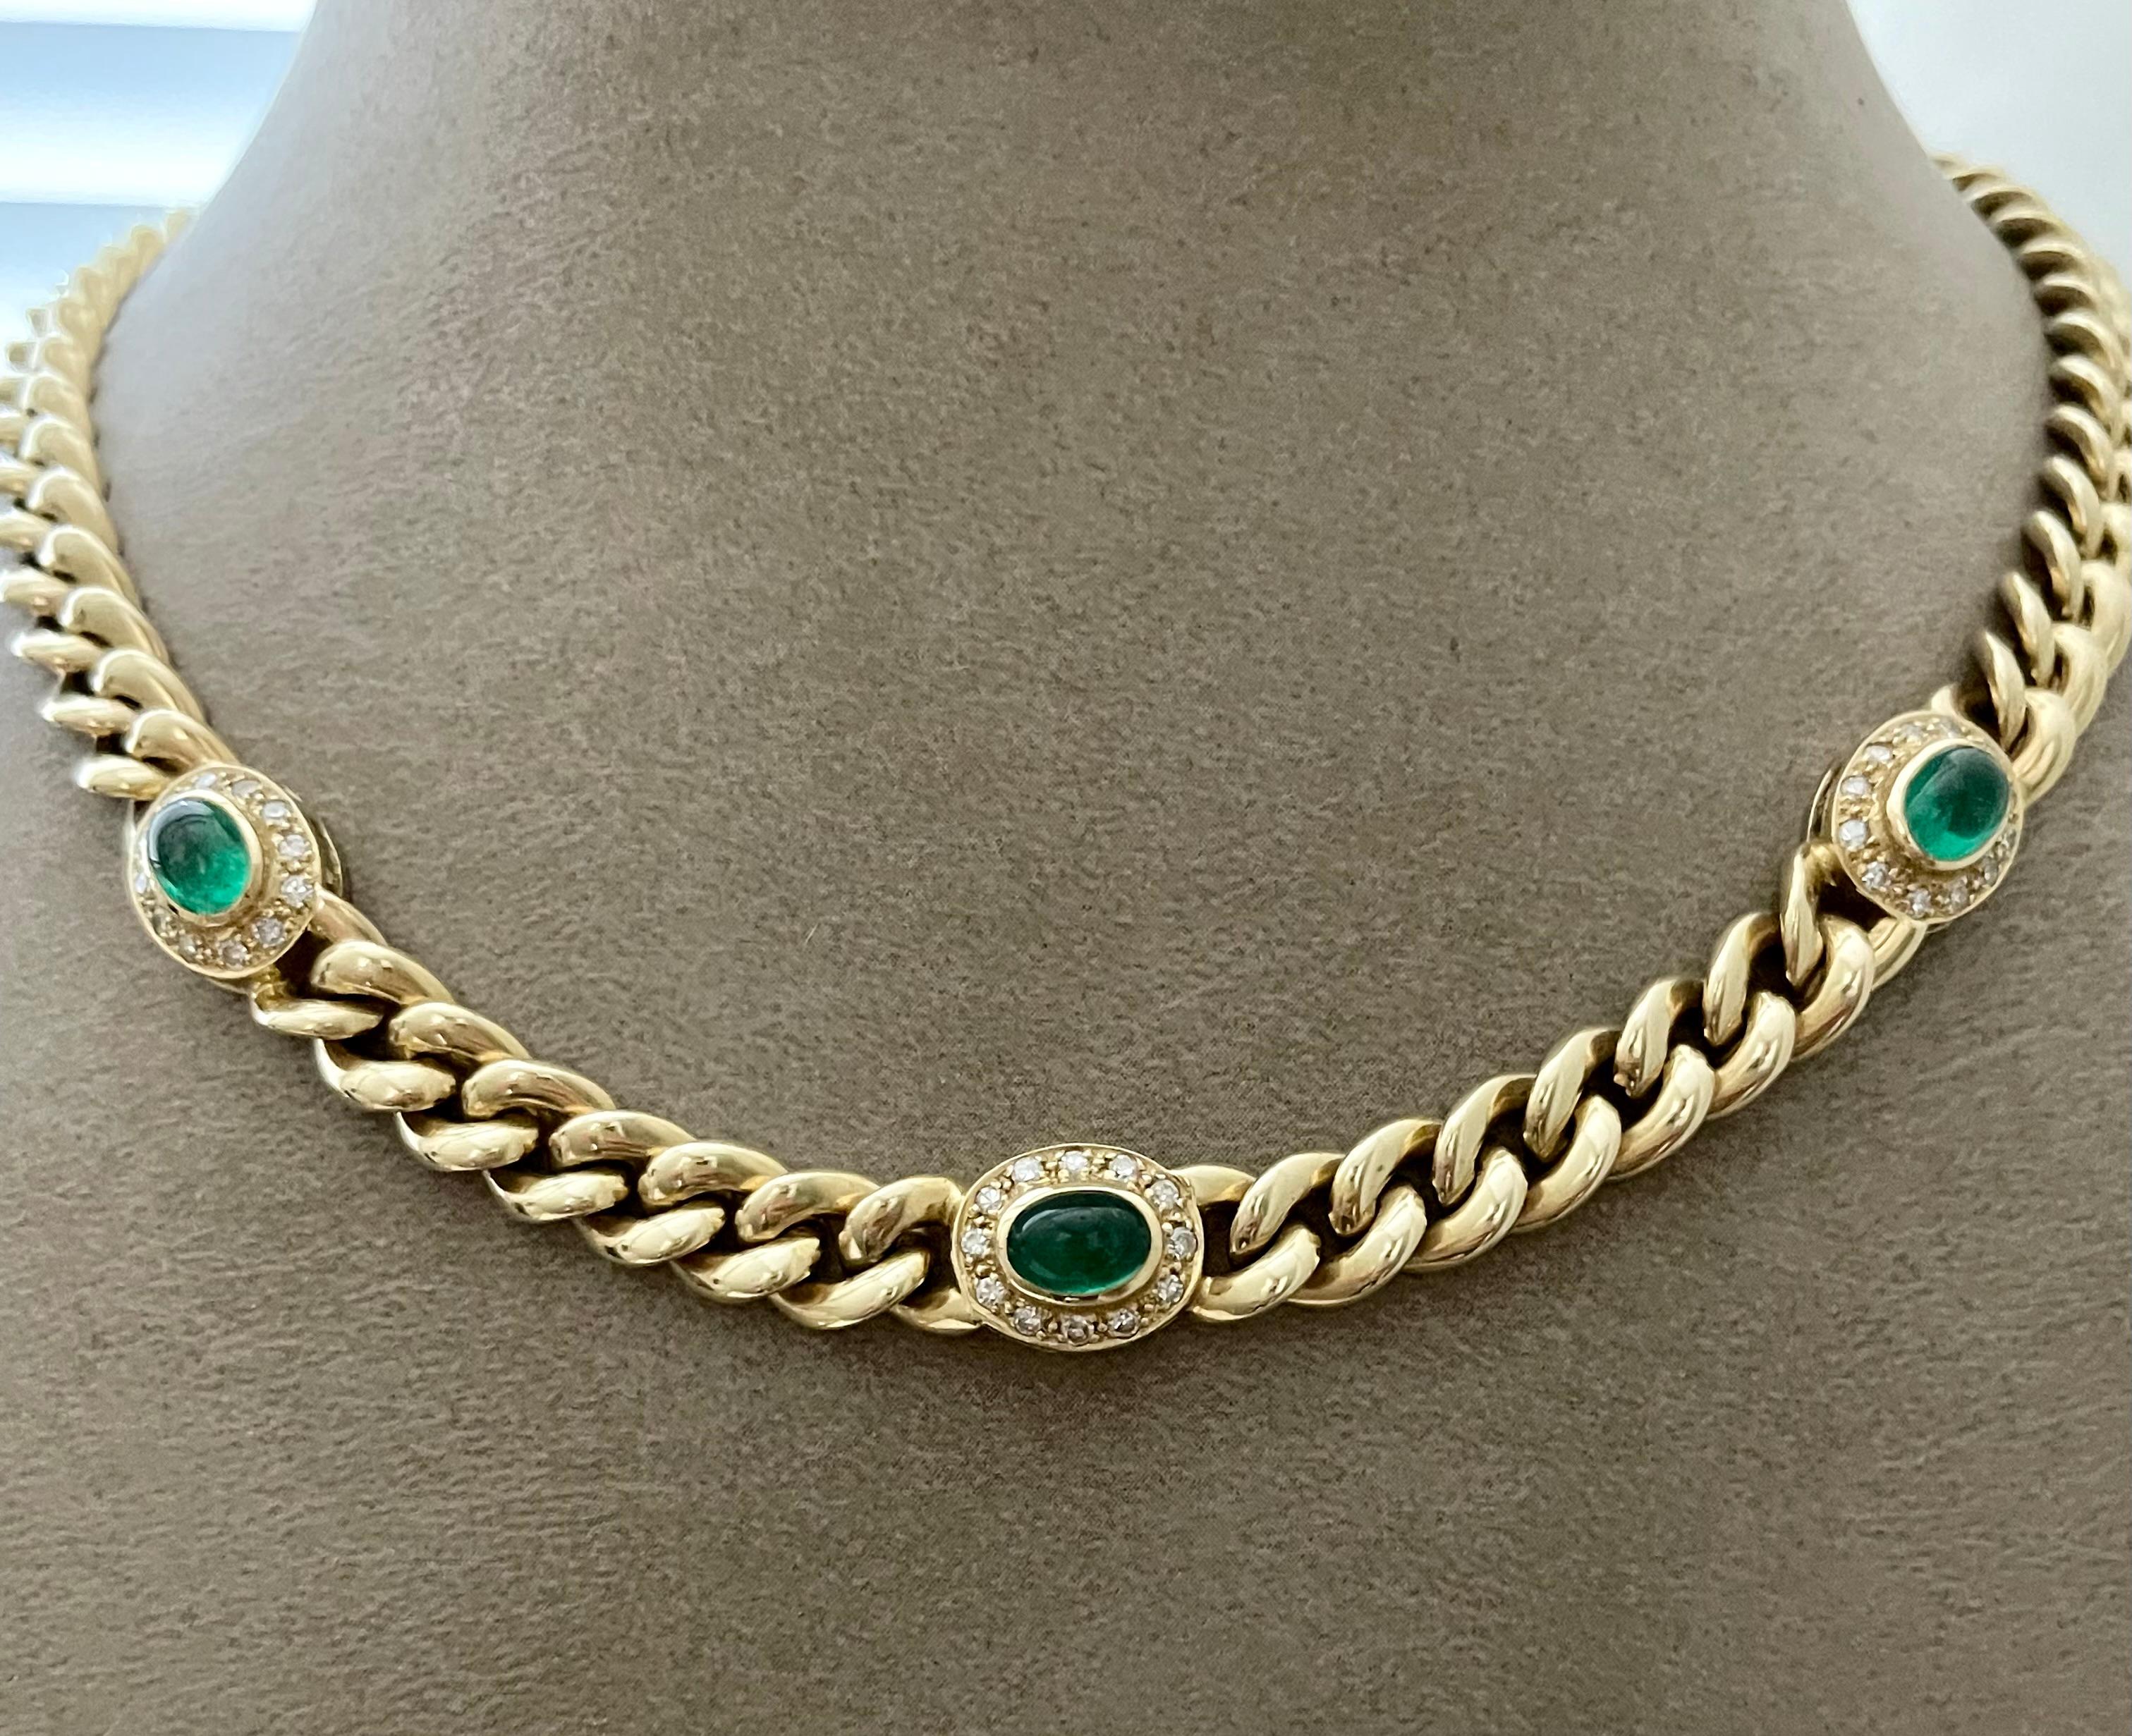 18K yellow Gold Twisted Curb Chain Necklace with 3 Bezel-Set Oval Emerald Cabochons in a Diamond surrounding. Signed Bucherer Lucerne Switzerland. 
Length: 40 cm. Weight: 78.74 grams. 
The necklace can be shortened to a custom length
Masterfully